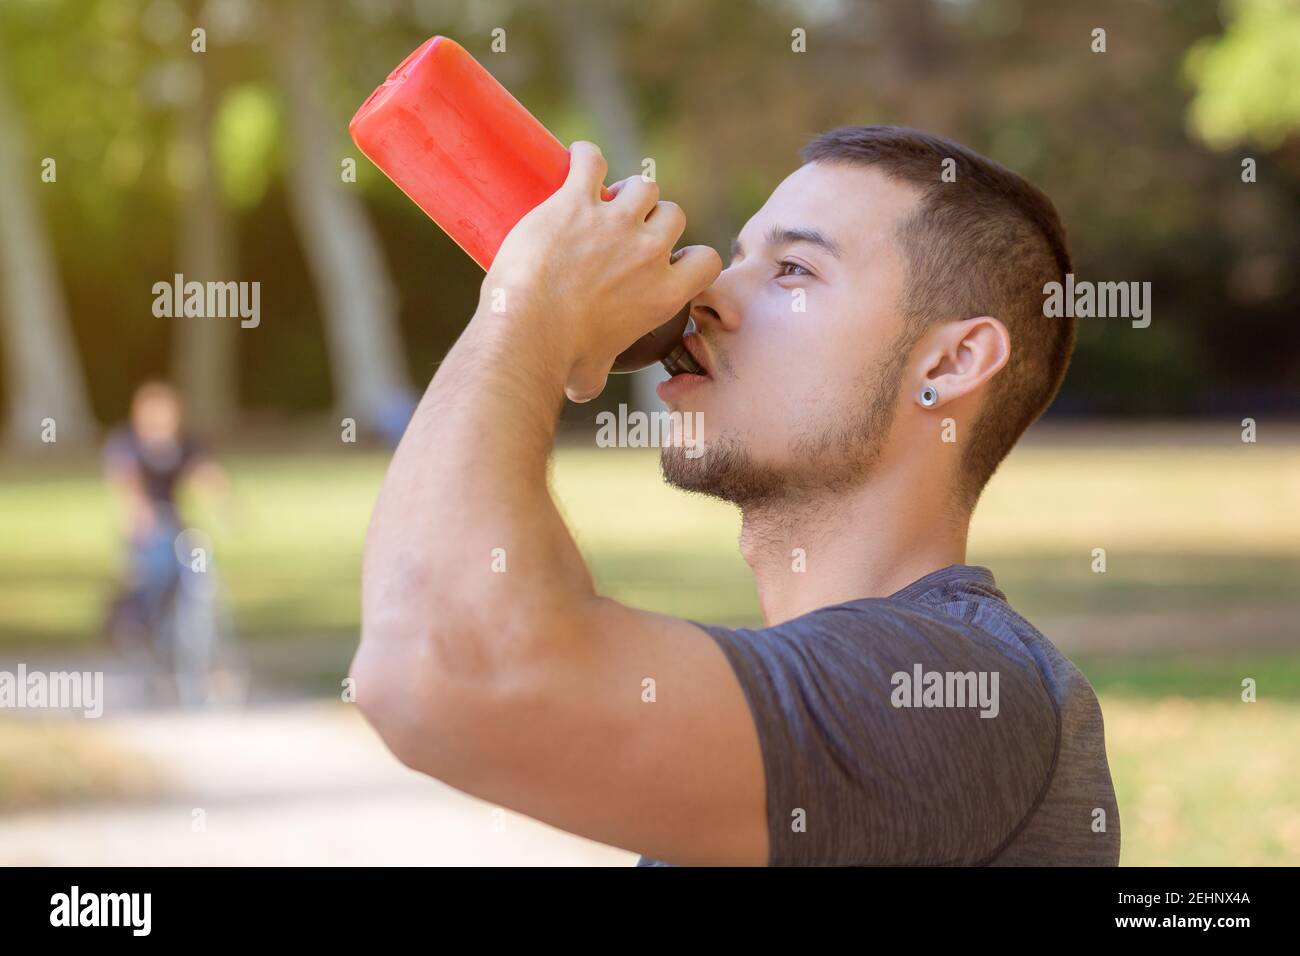 Drinking water runner young man drink jogger sports training fitness workout outdoor Stock Photo